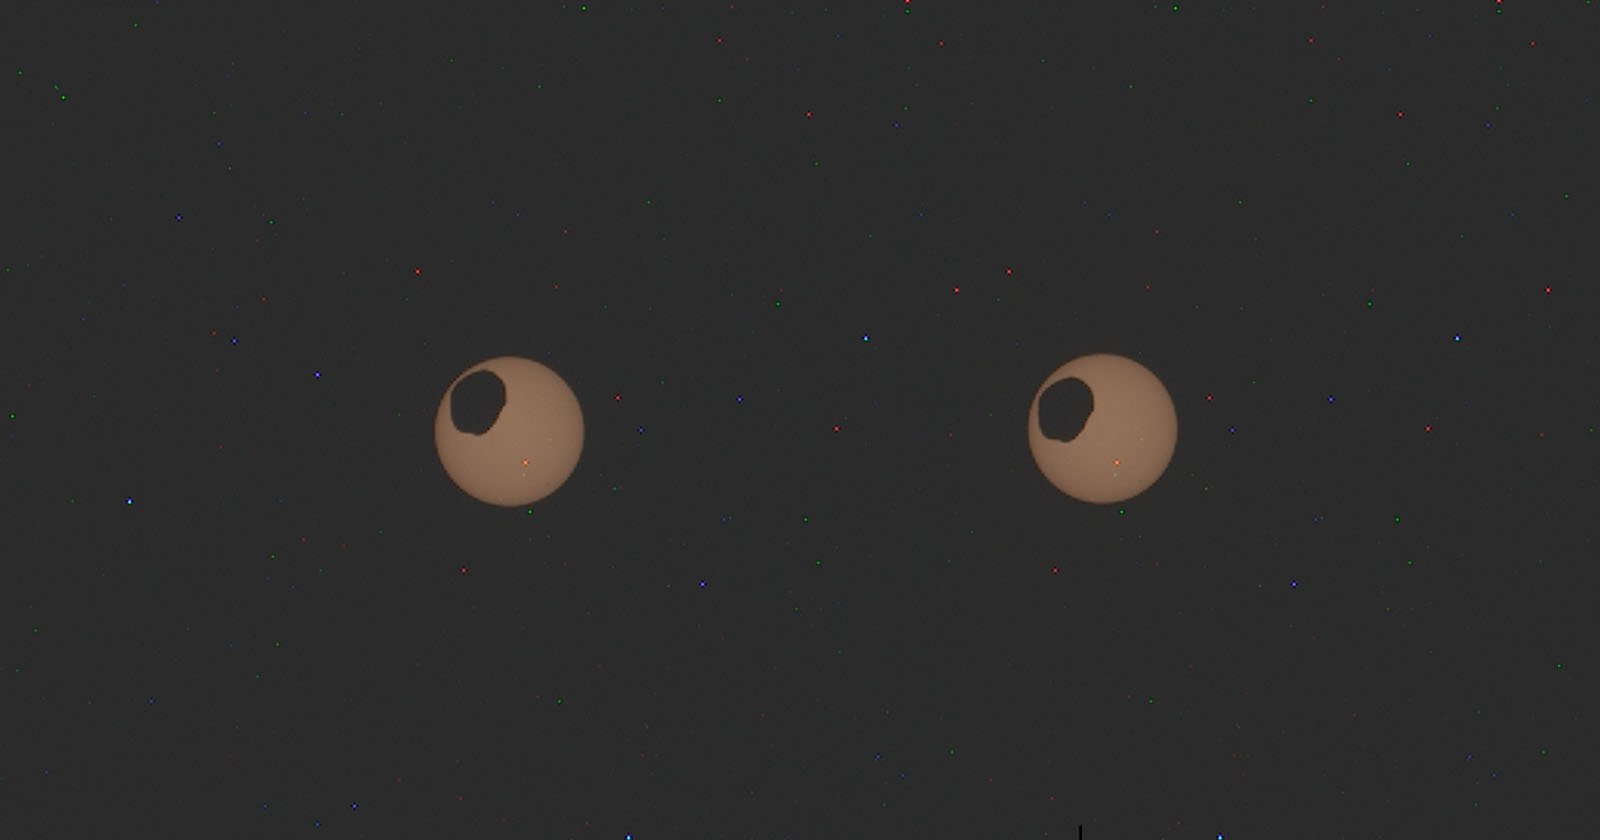 NASA Captures Martian Eclipse That Looks Like a Pair of Googly Eyes